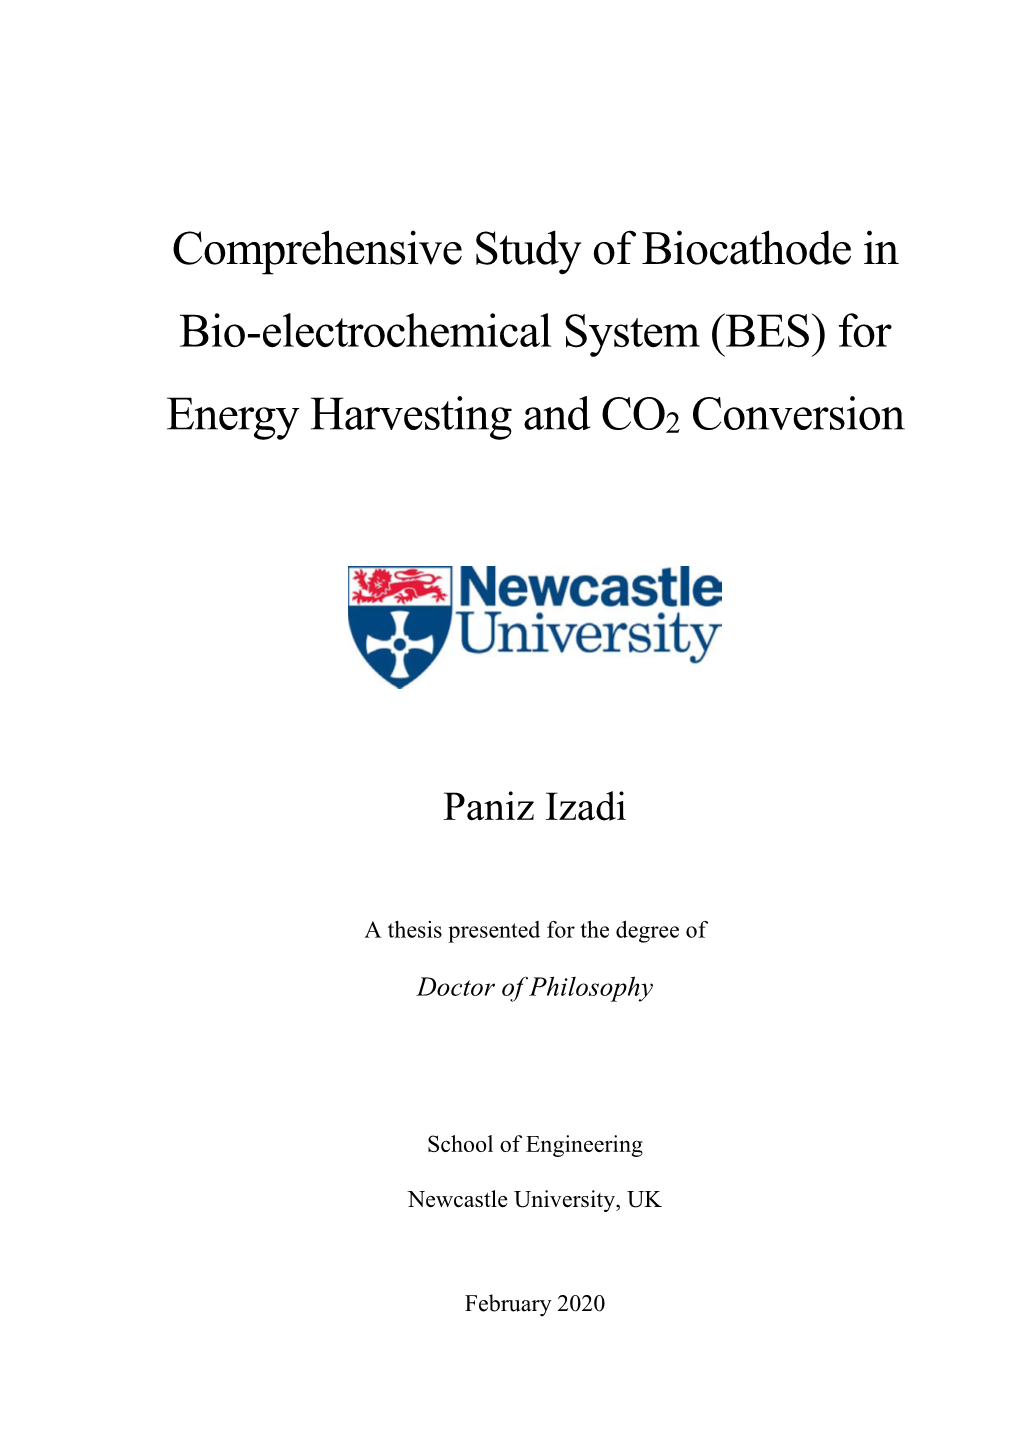 For Energy Harvesting and CO2 Conversion